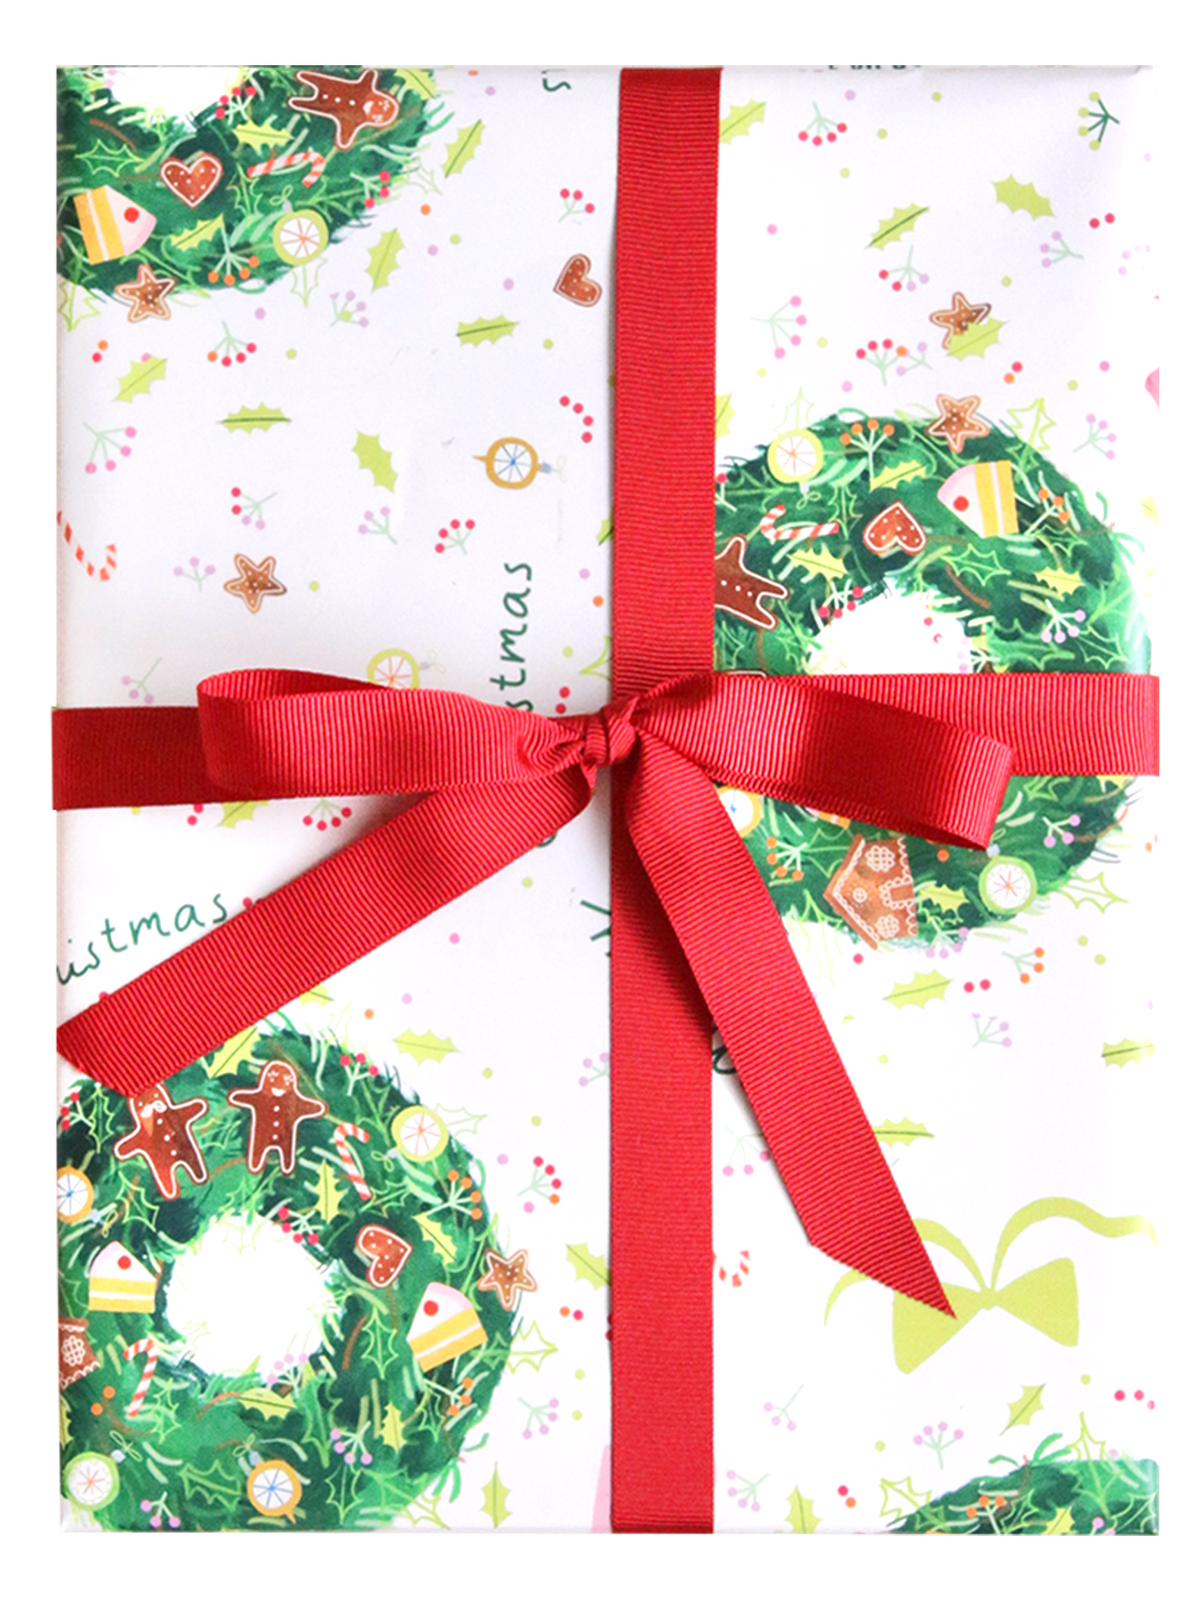 Afternoon Crumbs - Christmas Wreath Wrapping Paper - £3 - afternooncrumbs.com